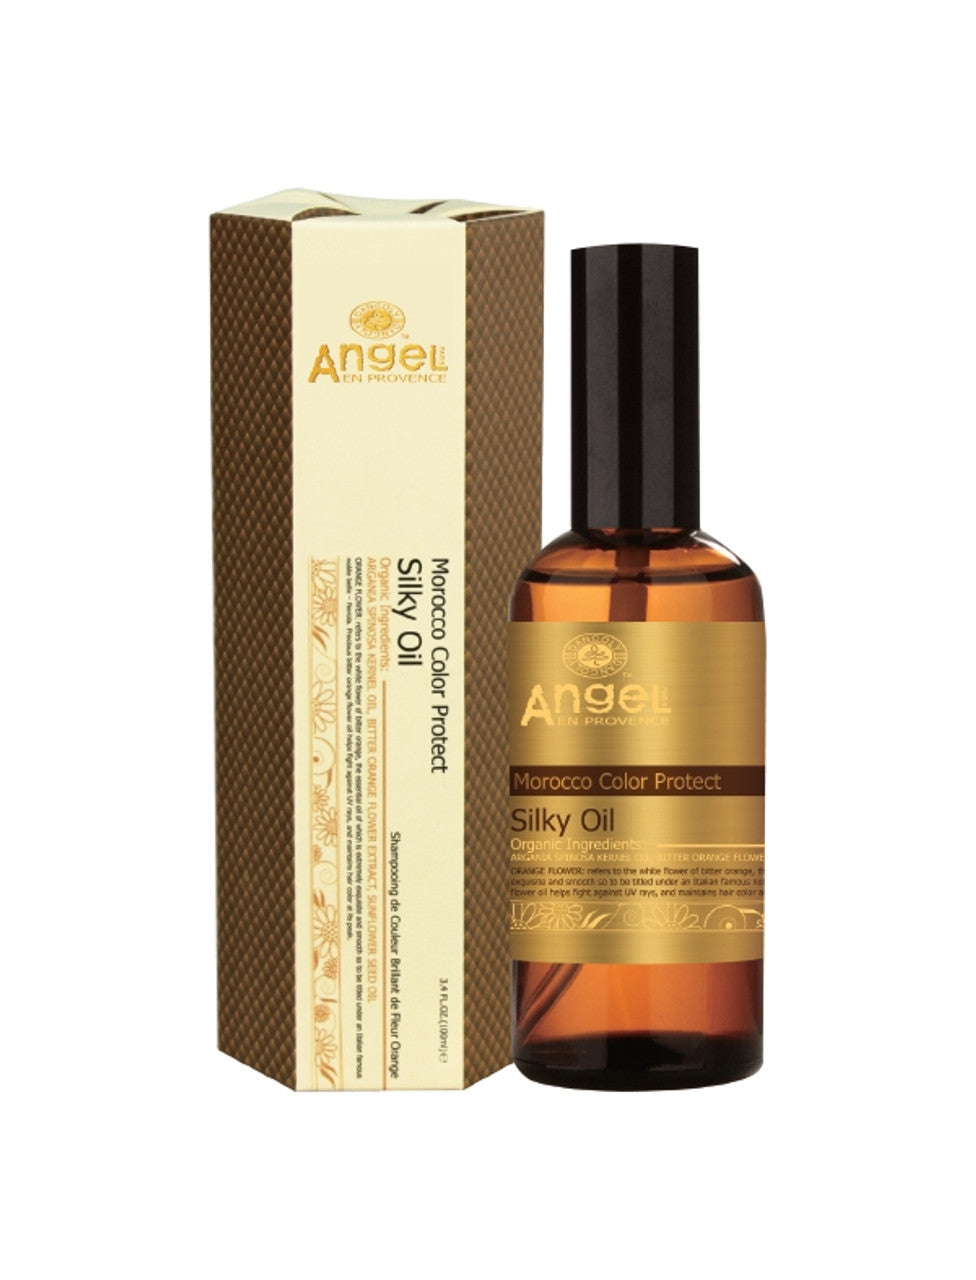 Angel Morocco Color Protect Silky Oil 100ml